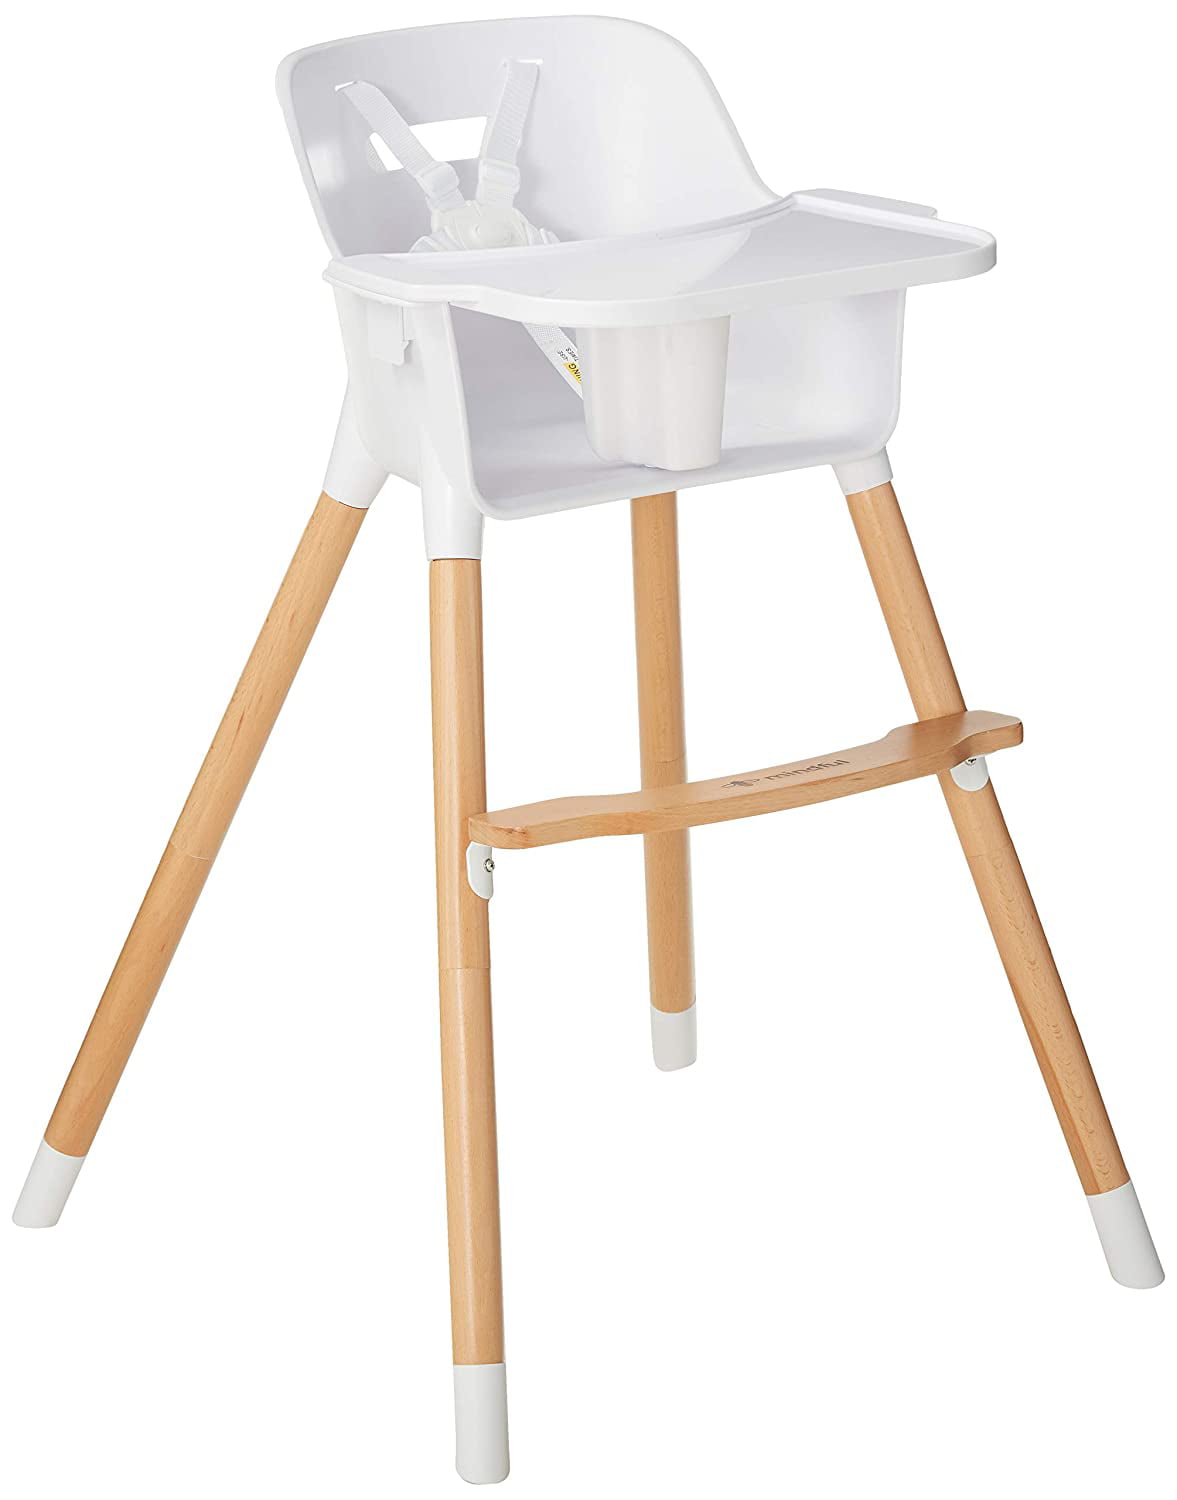 Modern Adjustable Height Wooden High Chair for Toddlers/Infants/Baby Feeding USA 